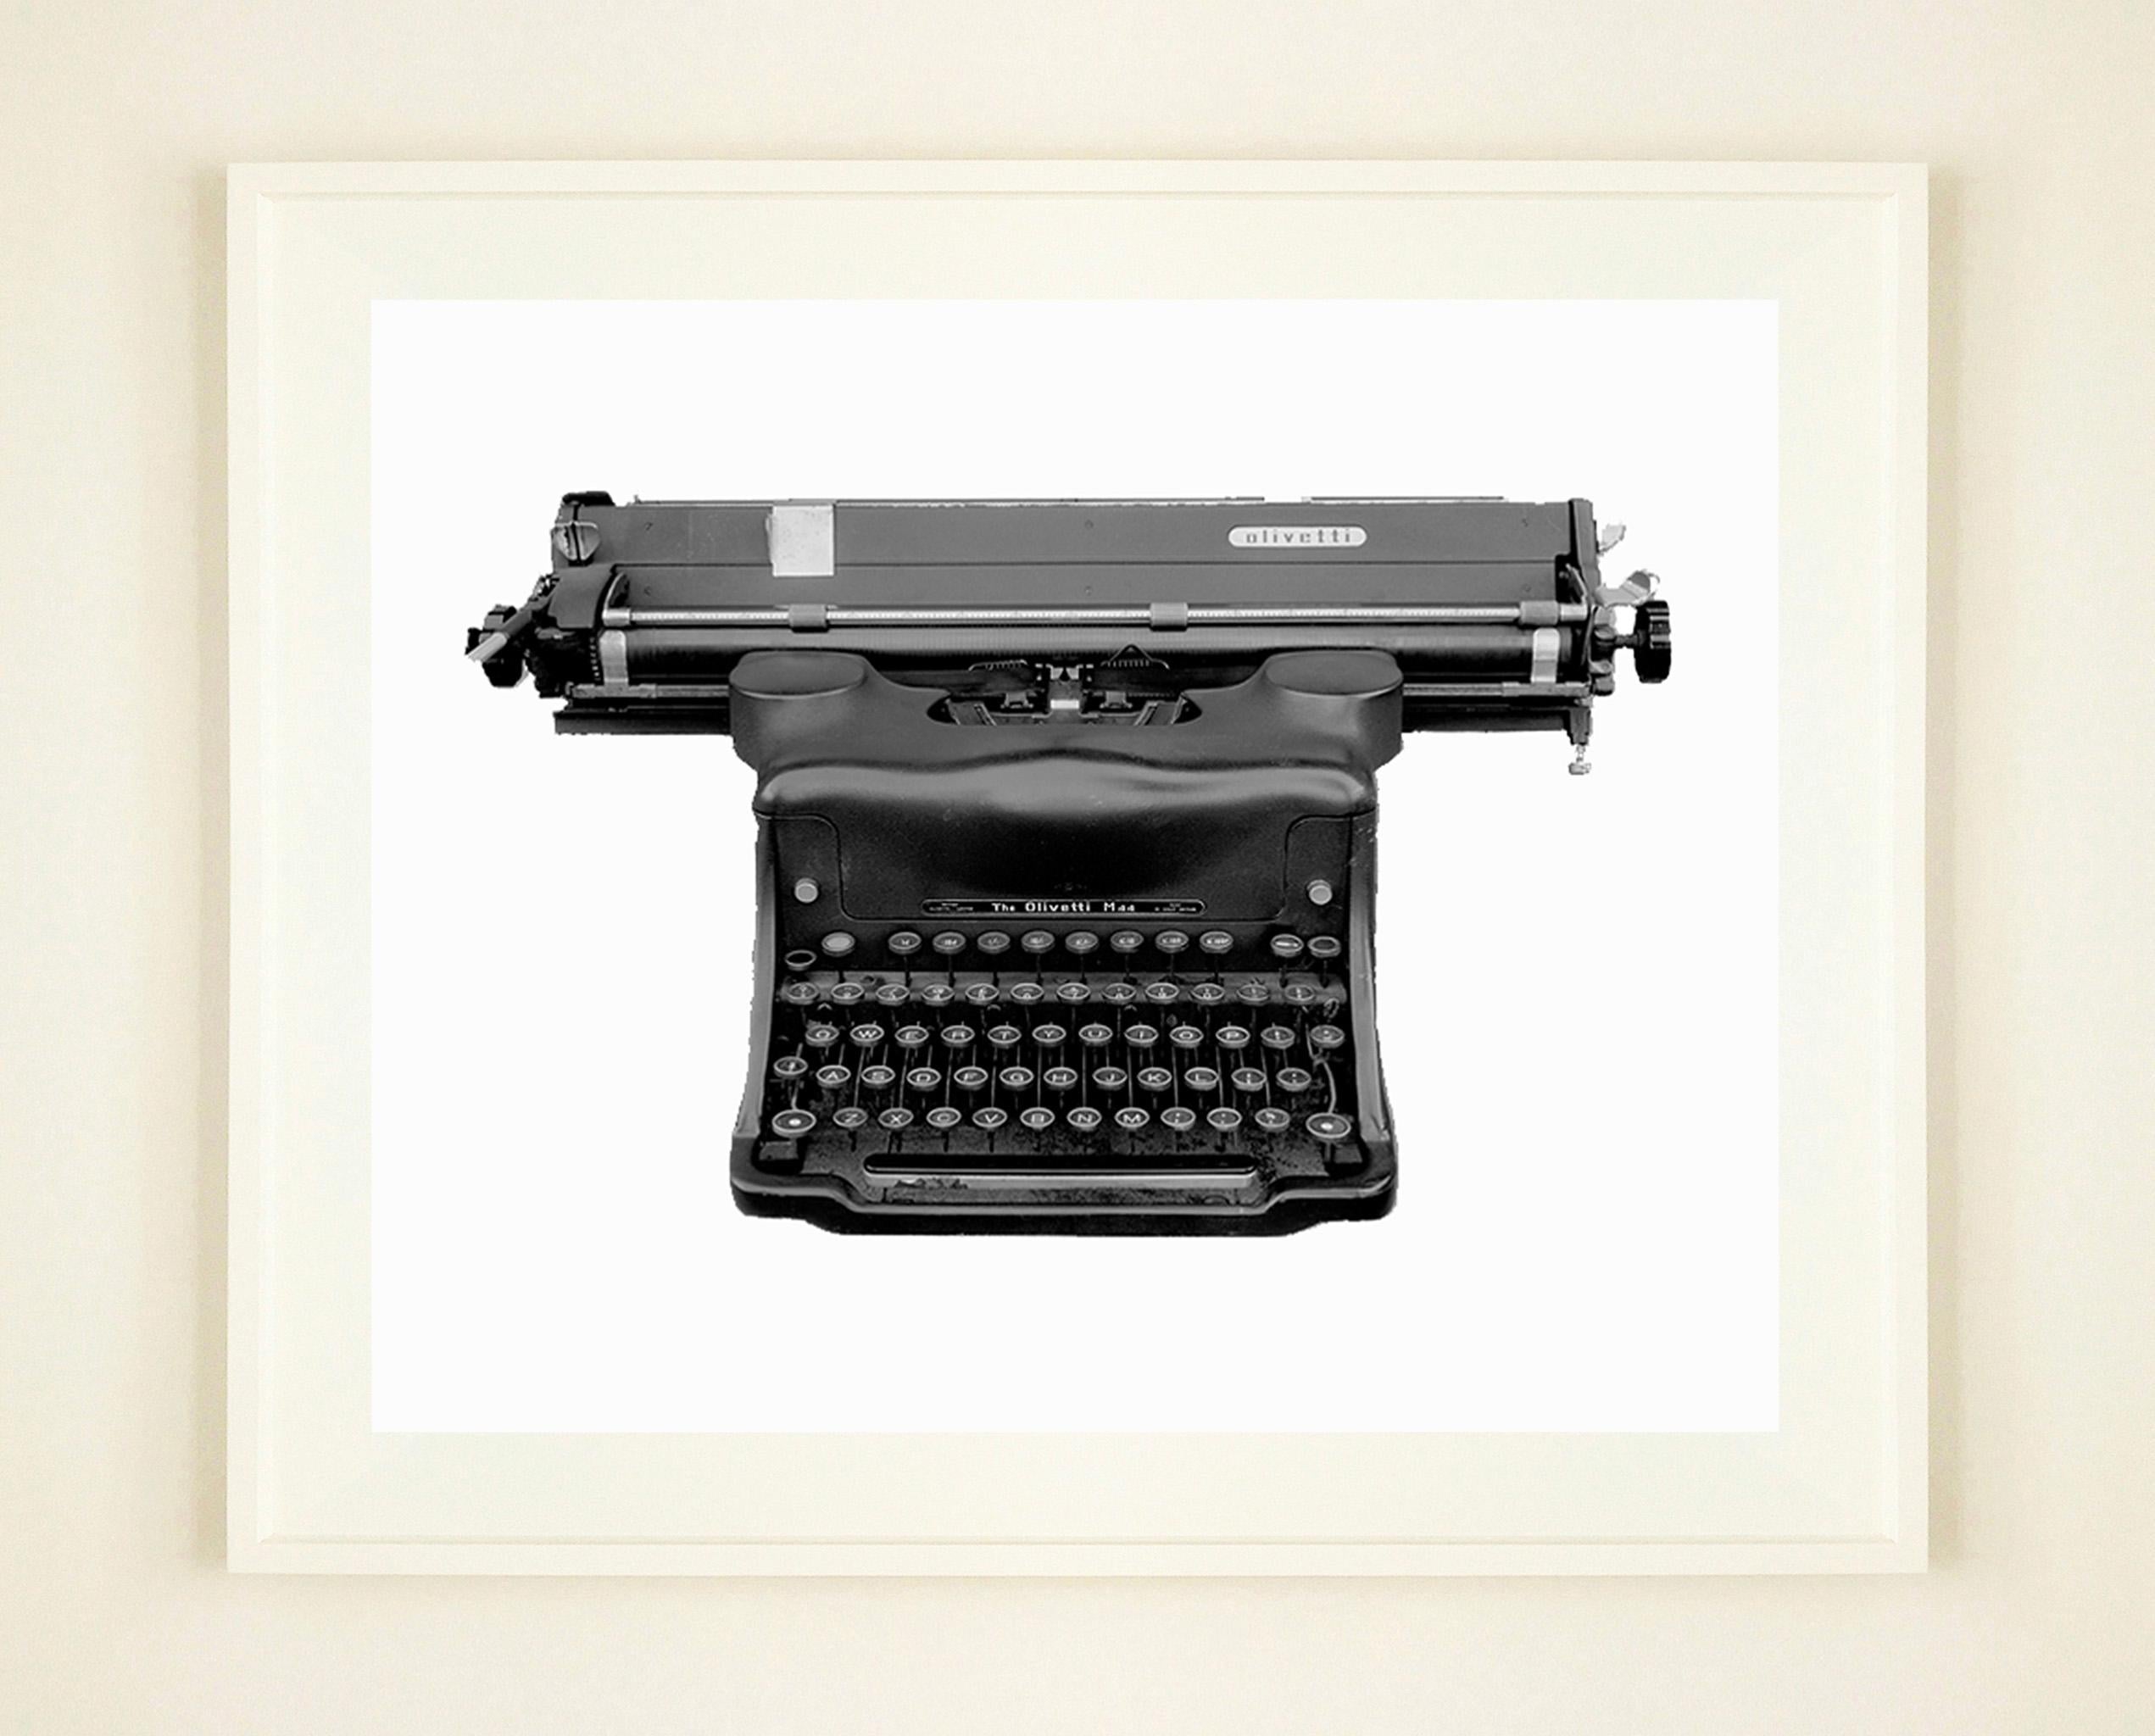 Samuel Field's still life of an Olivetti Typewriter, is given depth in the orthochromatic process he has used. Isolated in monochrome you appreciate the details of this vintage utilitarian object. 

This artwork is a limited edition of 10 lustre